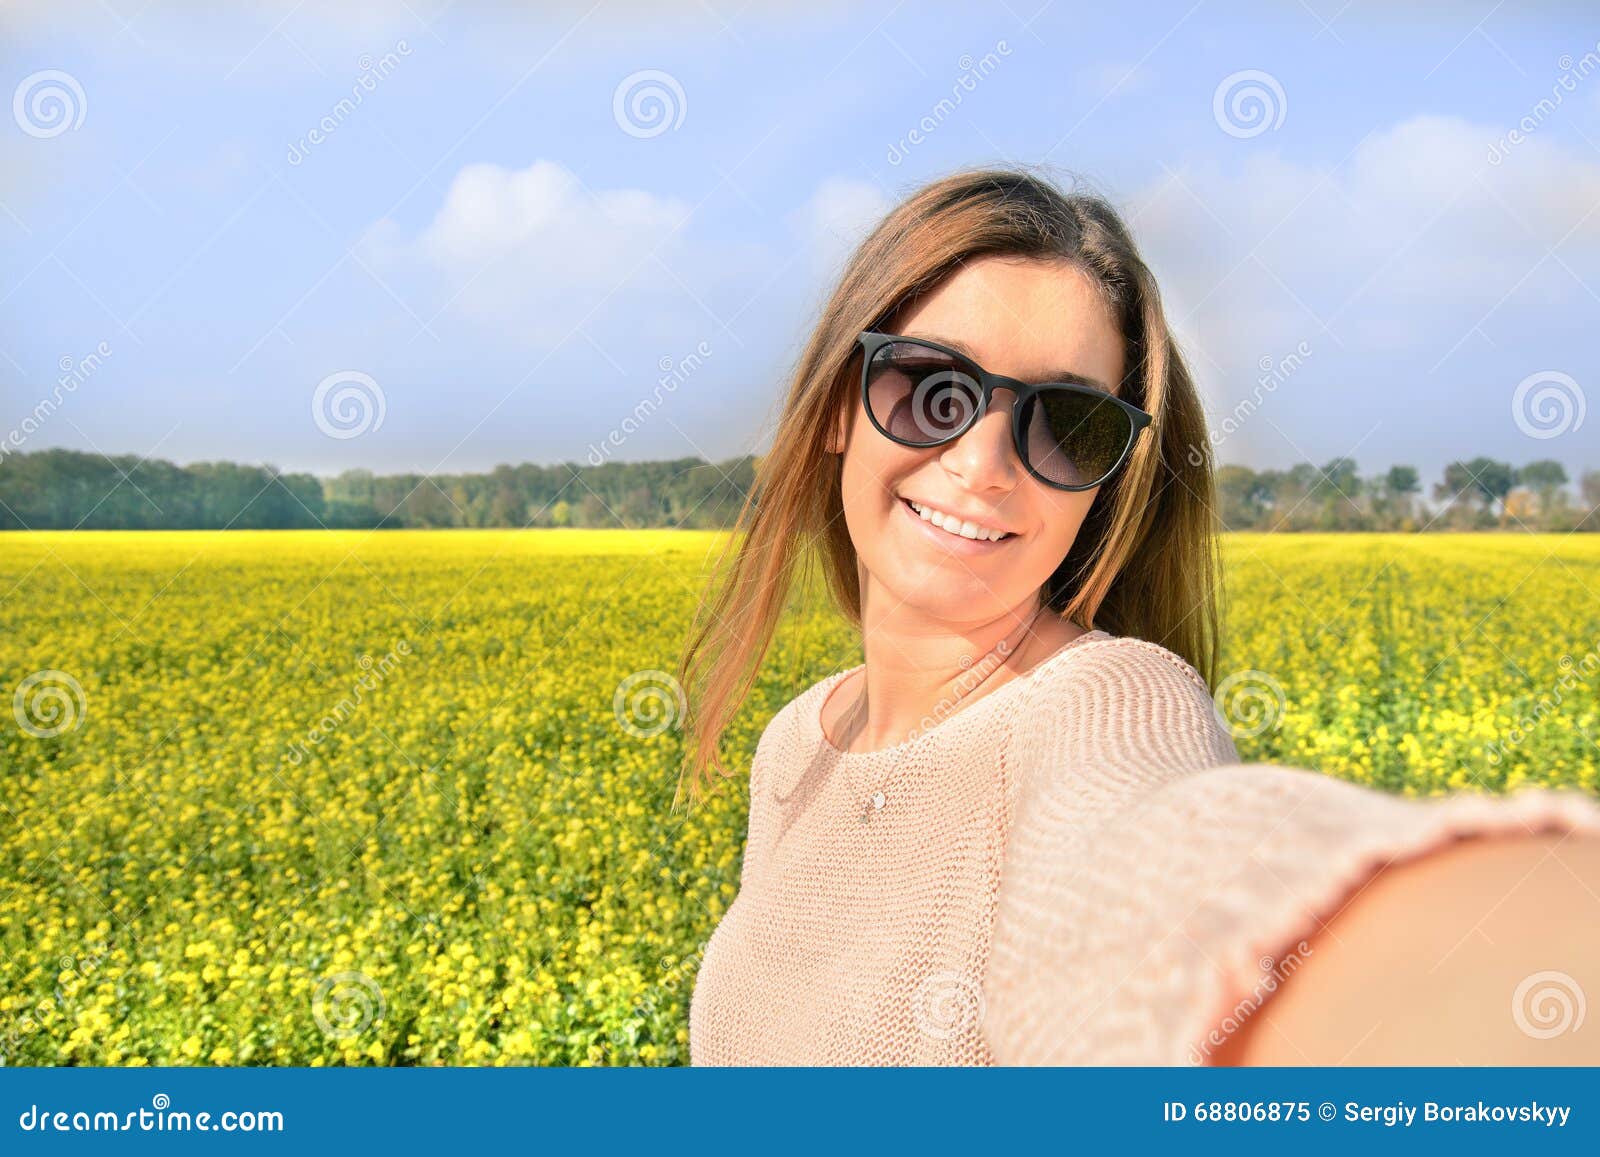 Beautiful Woman Taking Selfie Picture of Herself in Yellow Field with  Nature Background. Close Up Portrait of a Young Woman. Stock Image - Image  of cute, lifestyle: 68806875